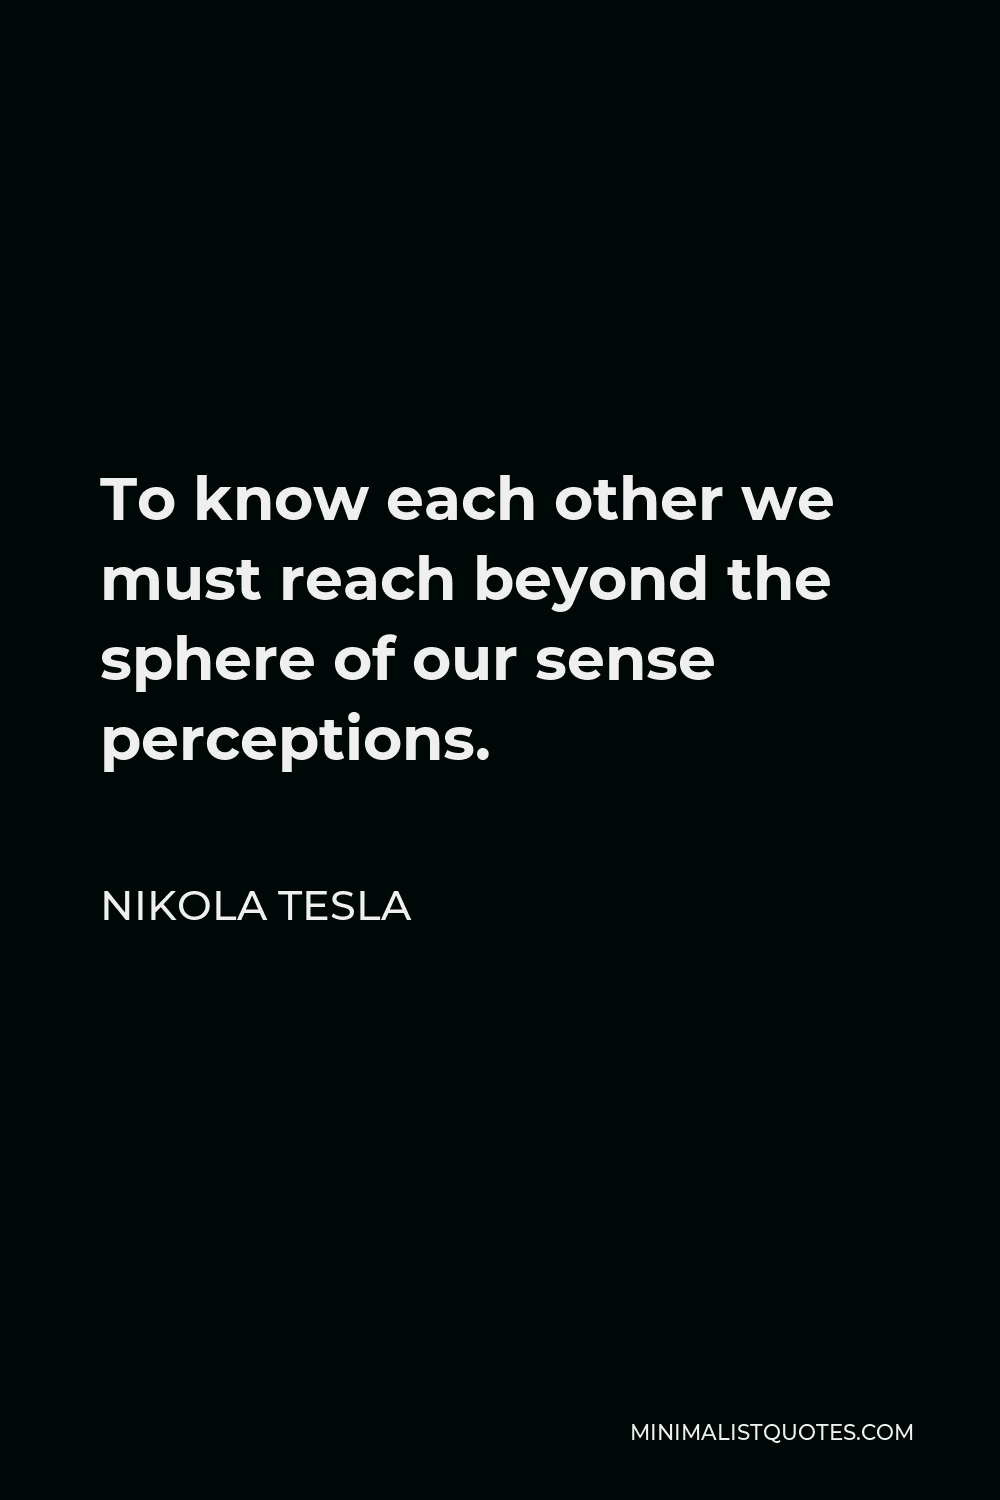 Nikola Tesla Quote - To know each other we must reach beyond the sphere of our sense perceptions.